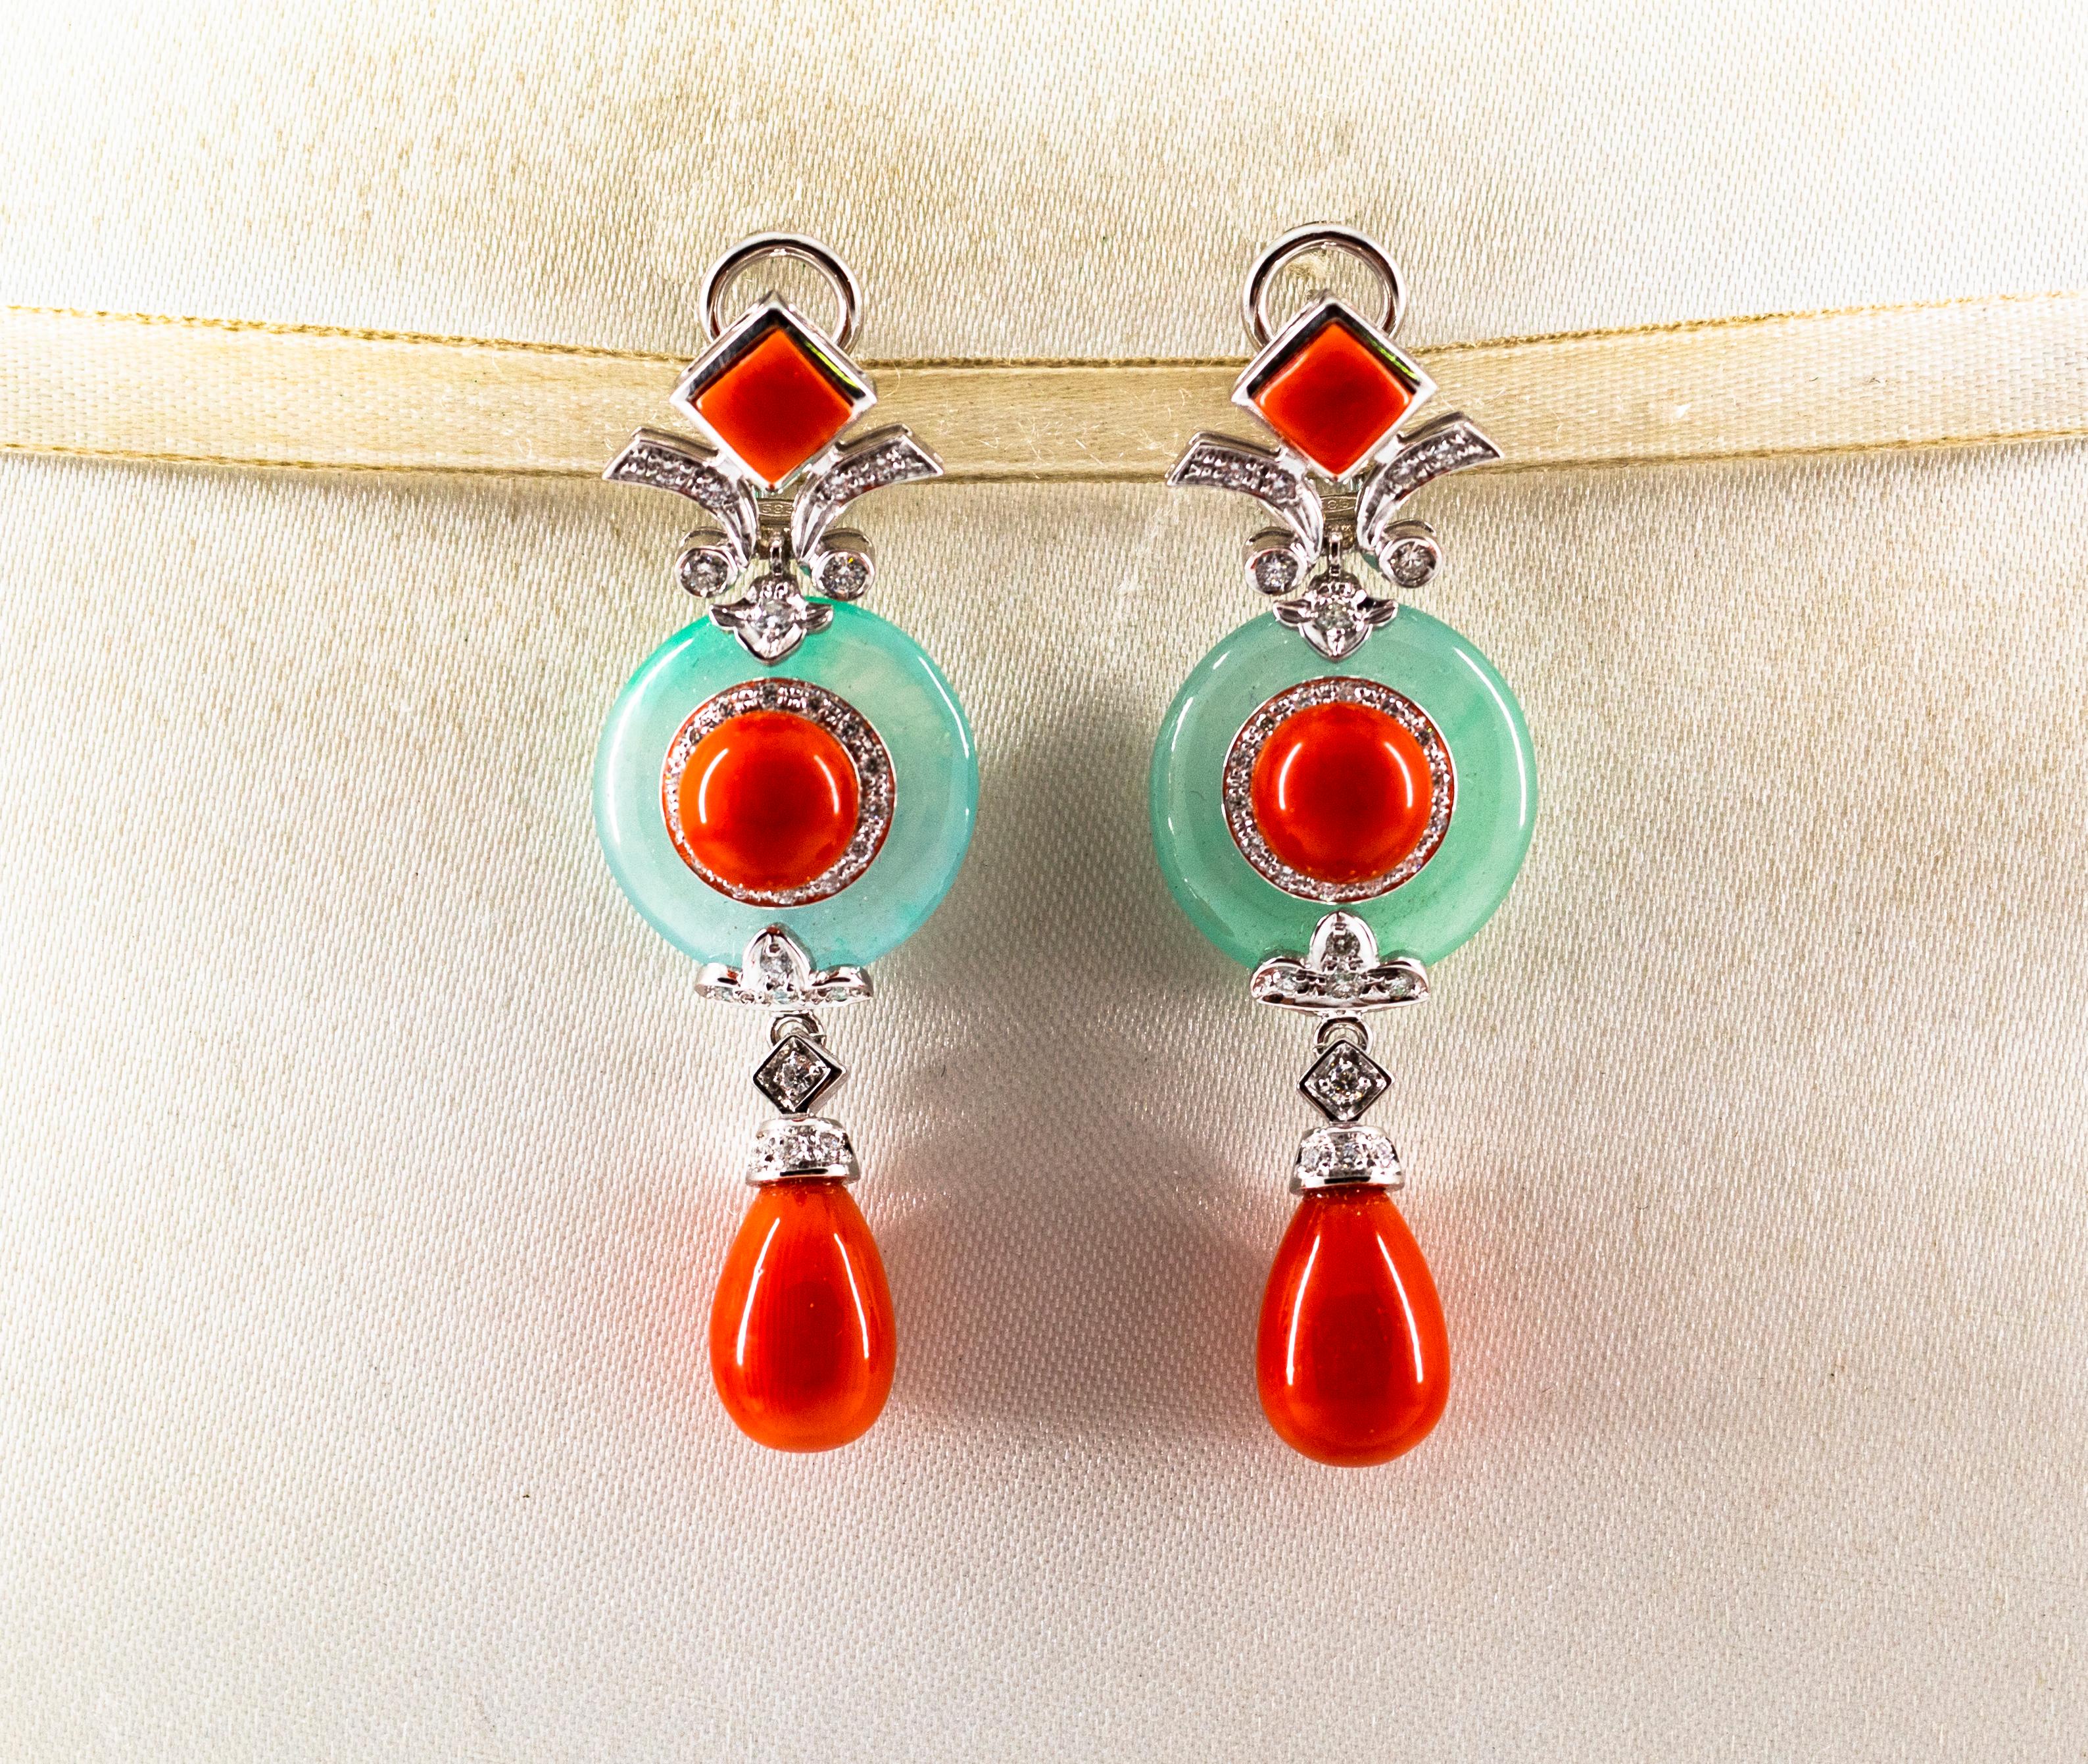 These Clip-On Earrings are made of 14K White Gold.
These Earrings have 0.60 Carats of White Diamonds.
These Earrings have also Mediterranean (Sardinia, Italy) Red Coral and Jade.
All our Earrings have pins for pierced ears but we can change the